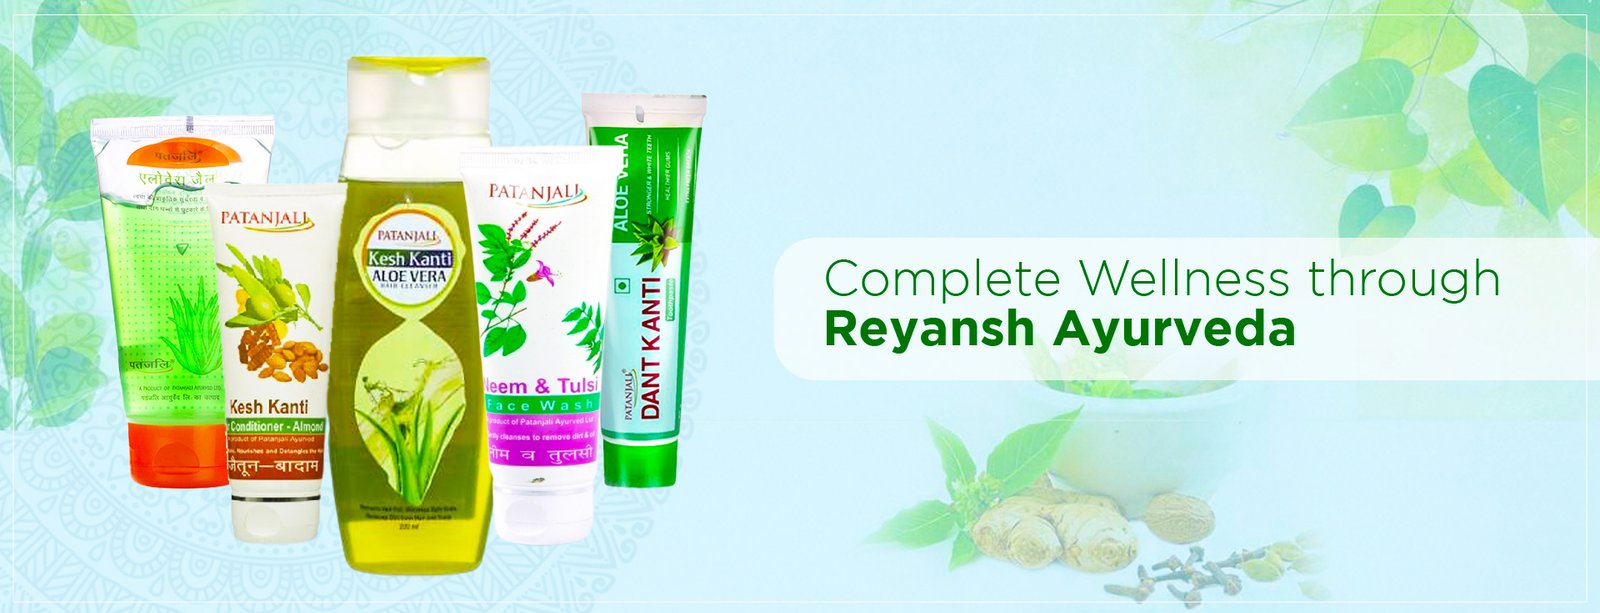 (c) Ayurvedaproducts.co.uk